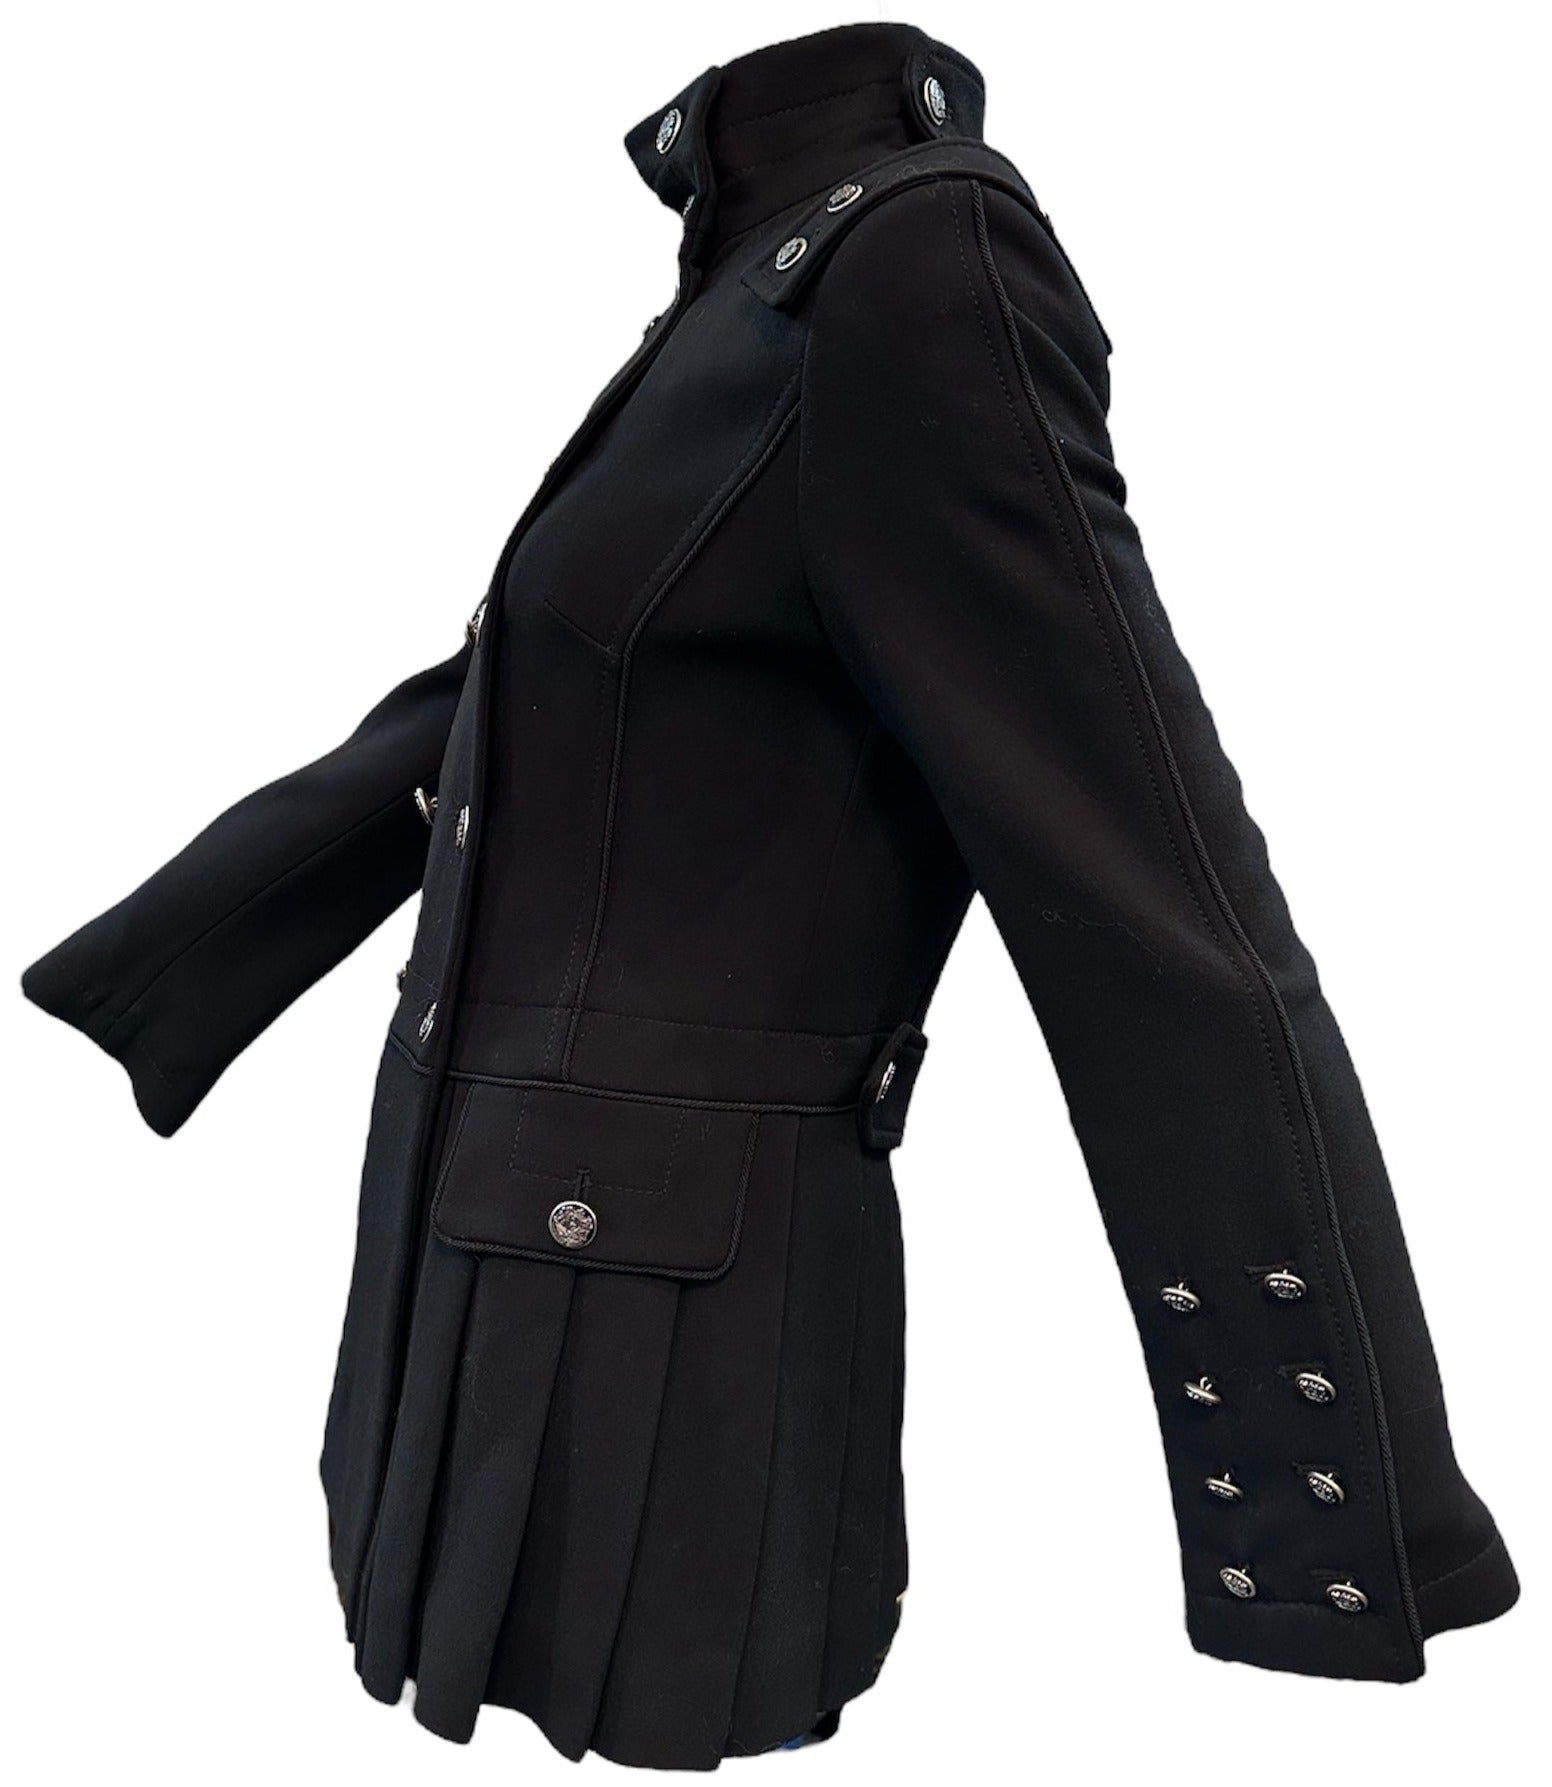 Dolce and Gabbana 2000s Spectacular Black Wool Military Inspired Coat SIDE 2 of 8